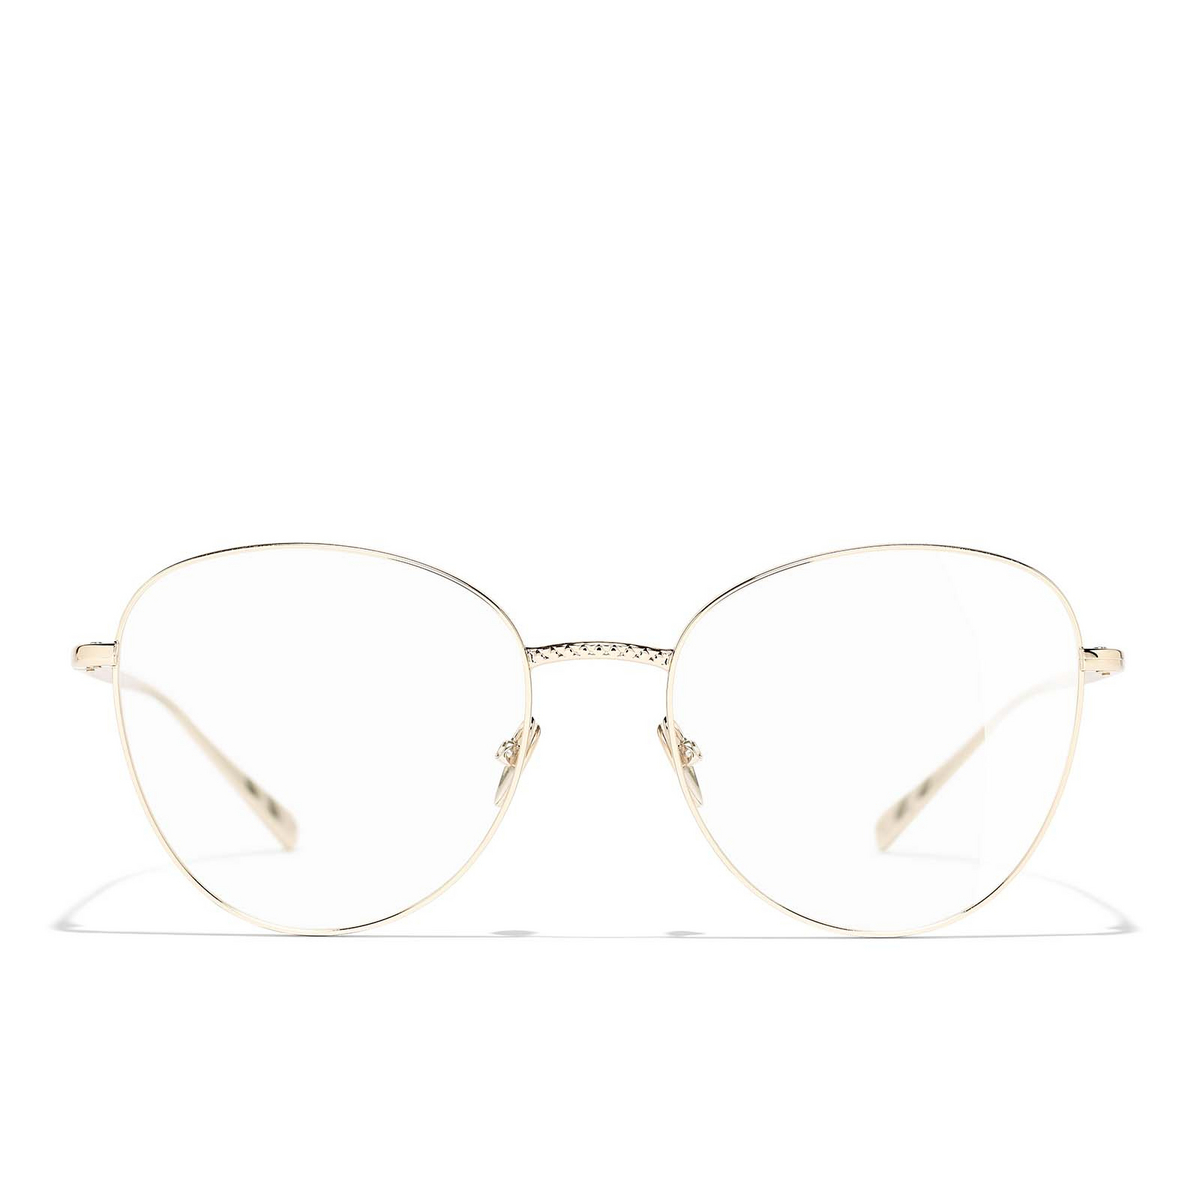 CHANEL round Eyeglasses C395 Gold - front view